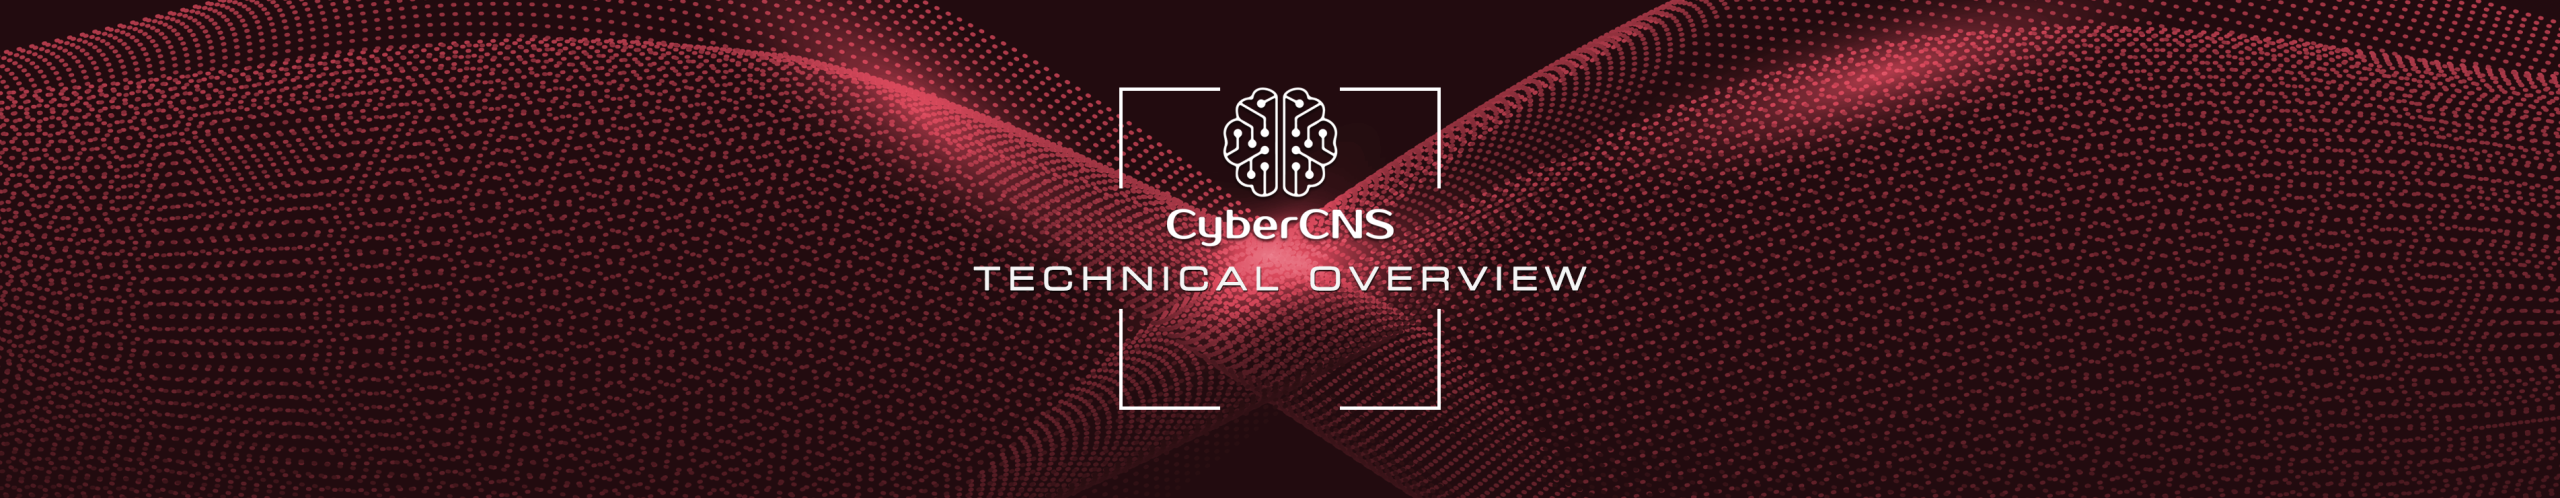 CyberCNS Technical Overview